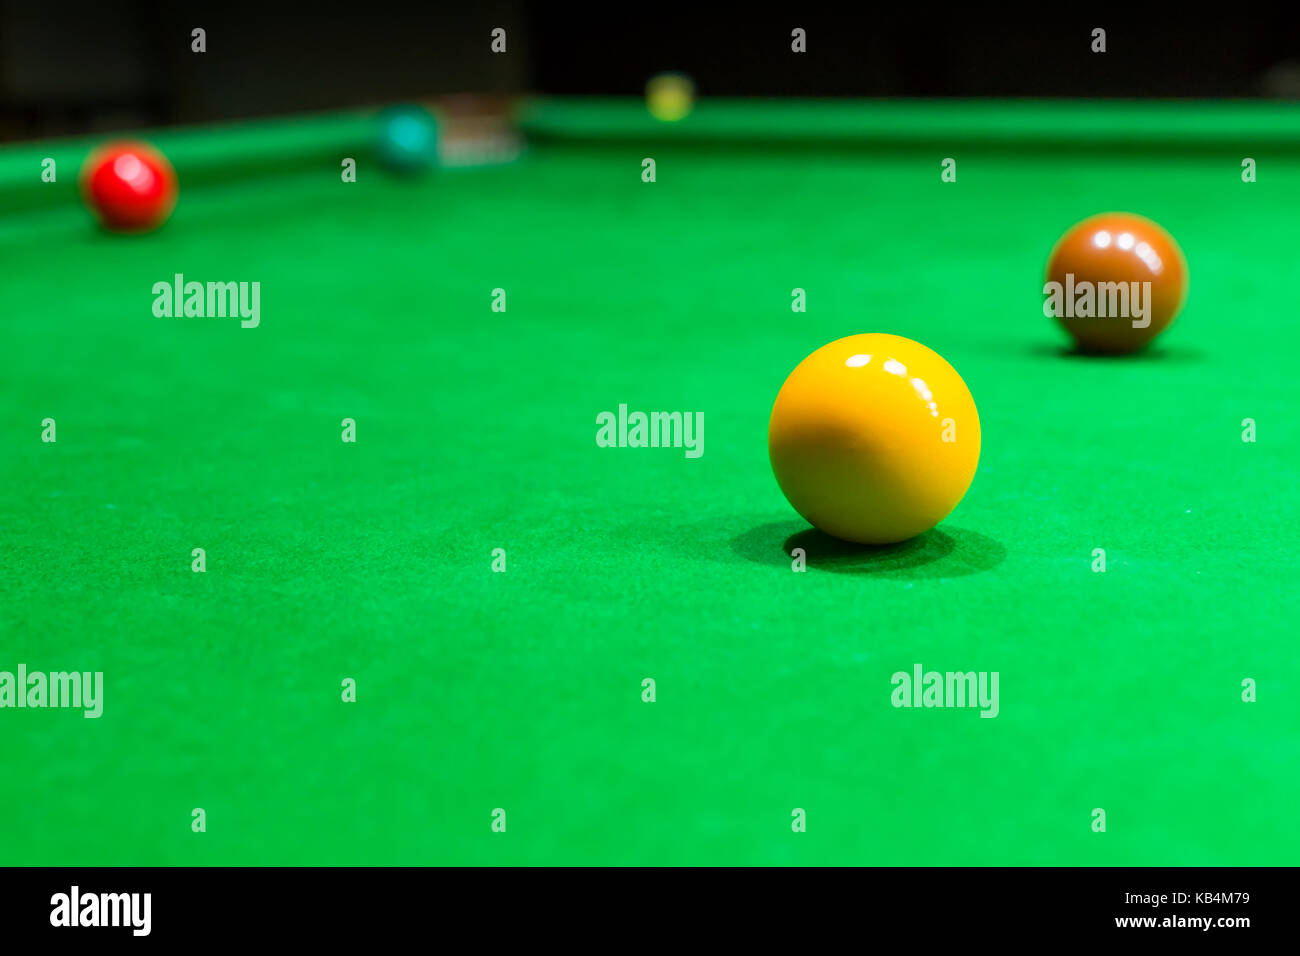 Snooker table and snooker ball Stock Photo